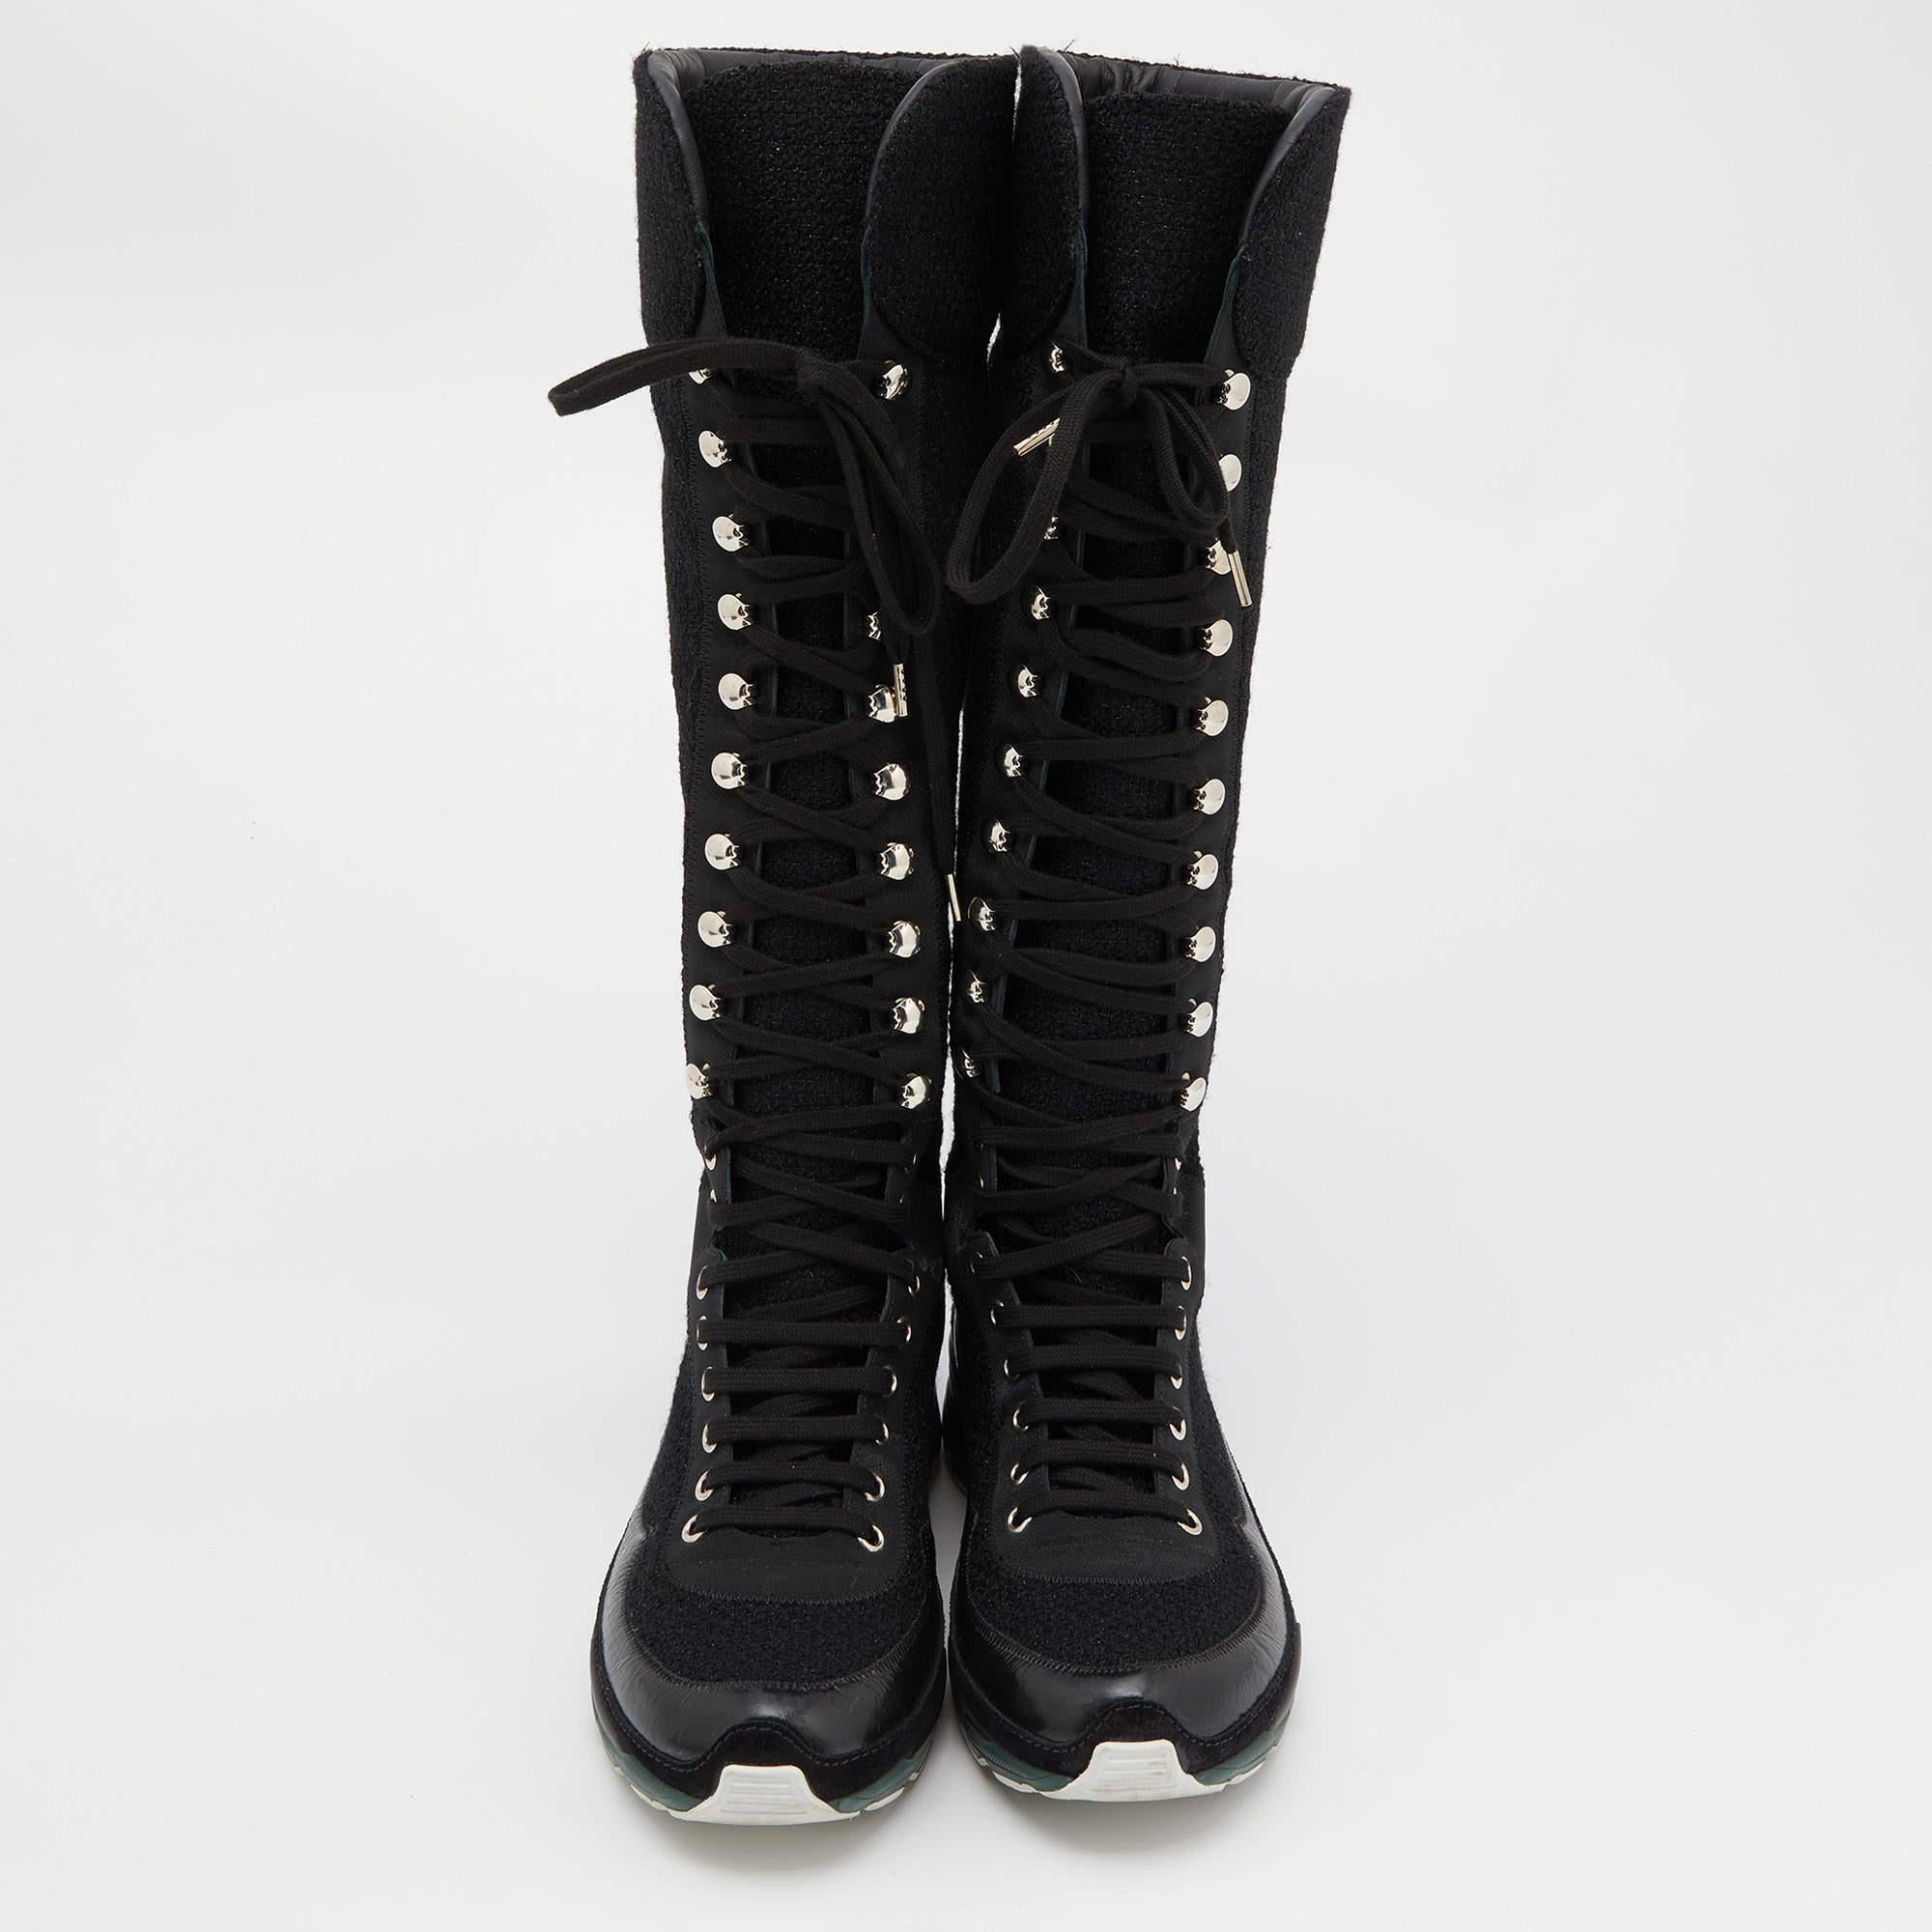 These boots from Chanel will last you for many seasons as they are made from a mix of quality materials and designed with fashion in mind. They come in black with round toes, laces along the front, and sneaker-like rubber soles.

